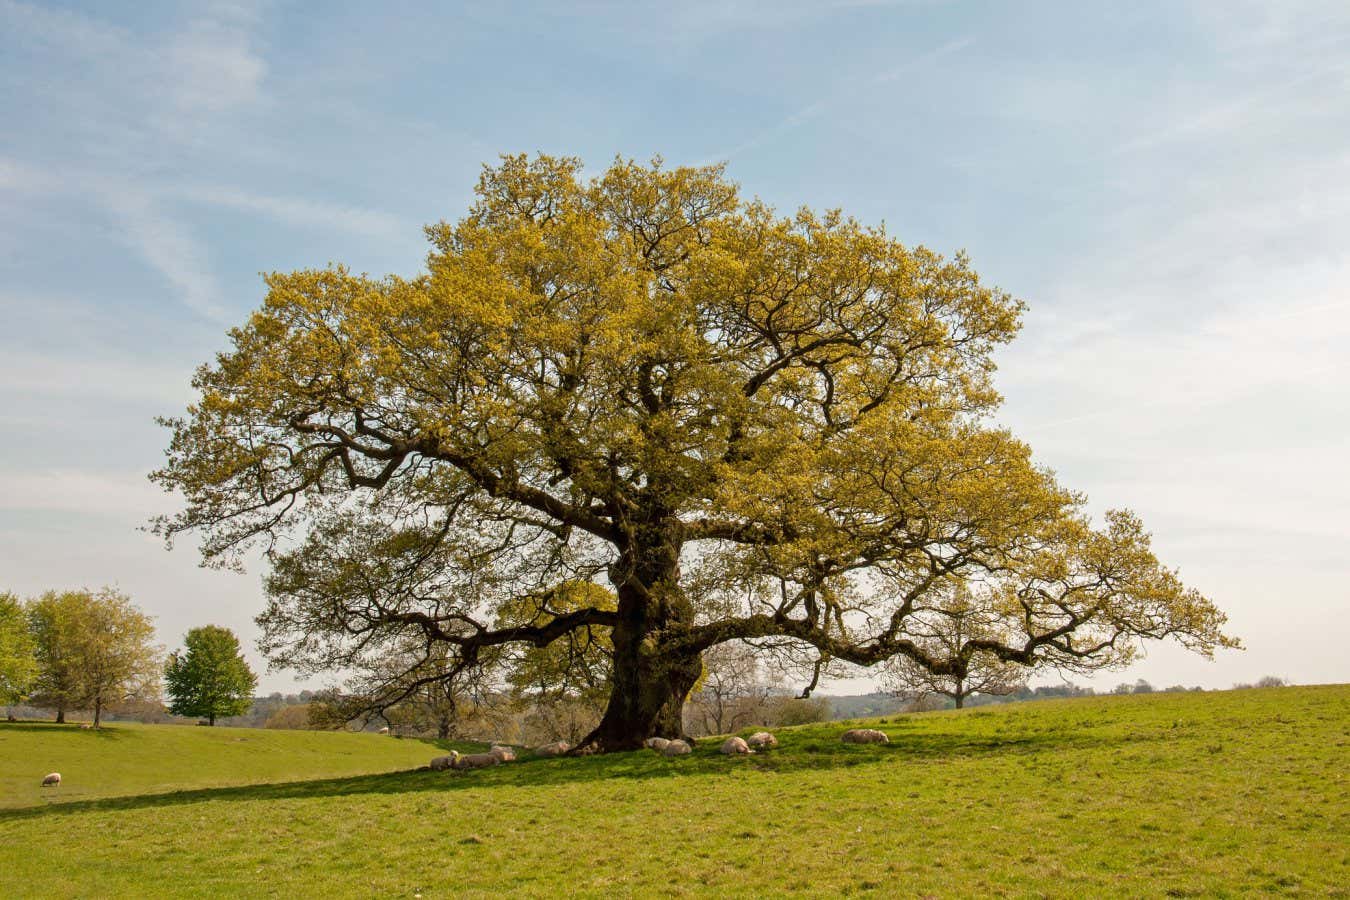 English oaks can withstand warming – but other trees will struggle